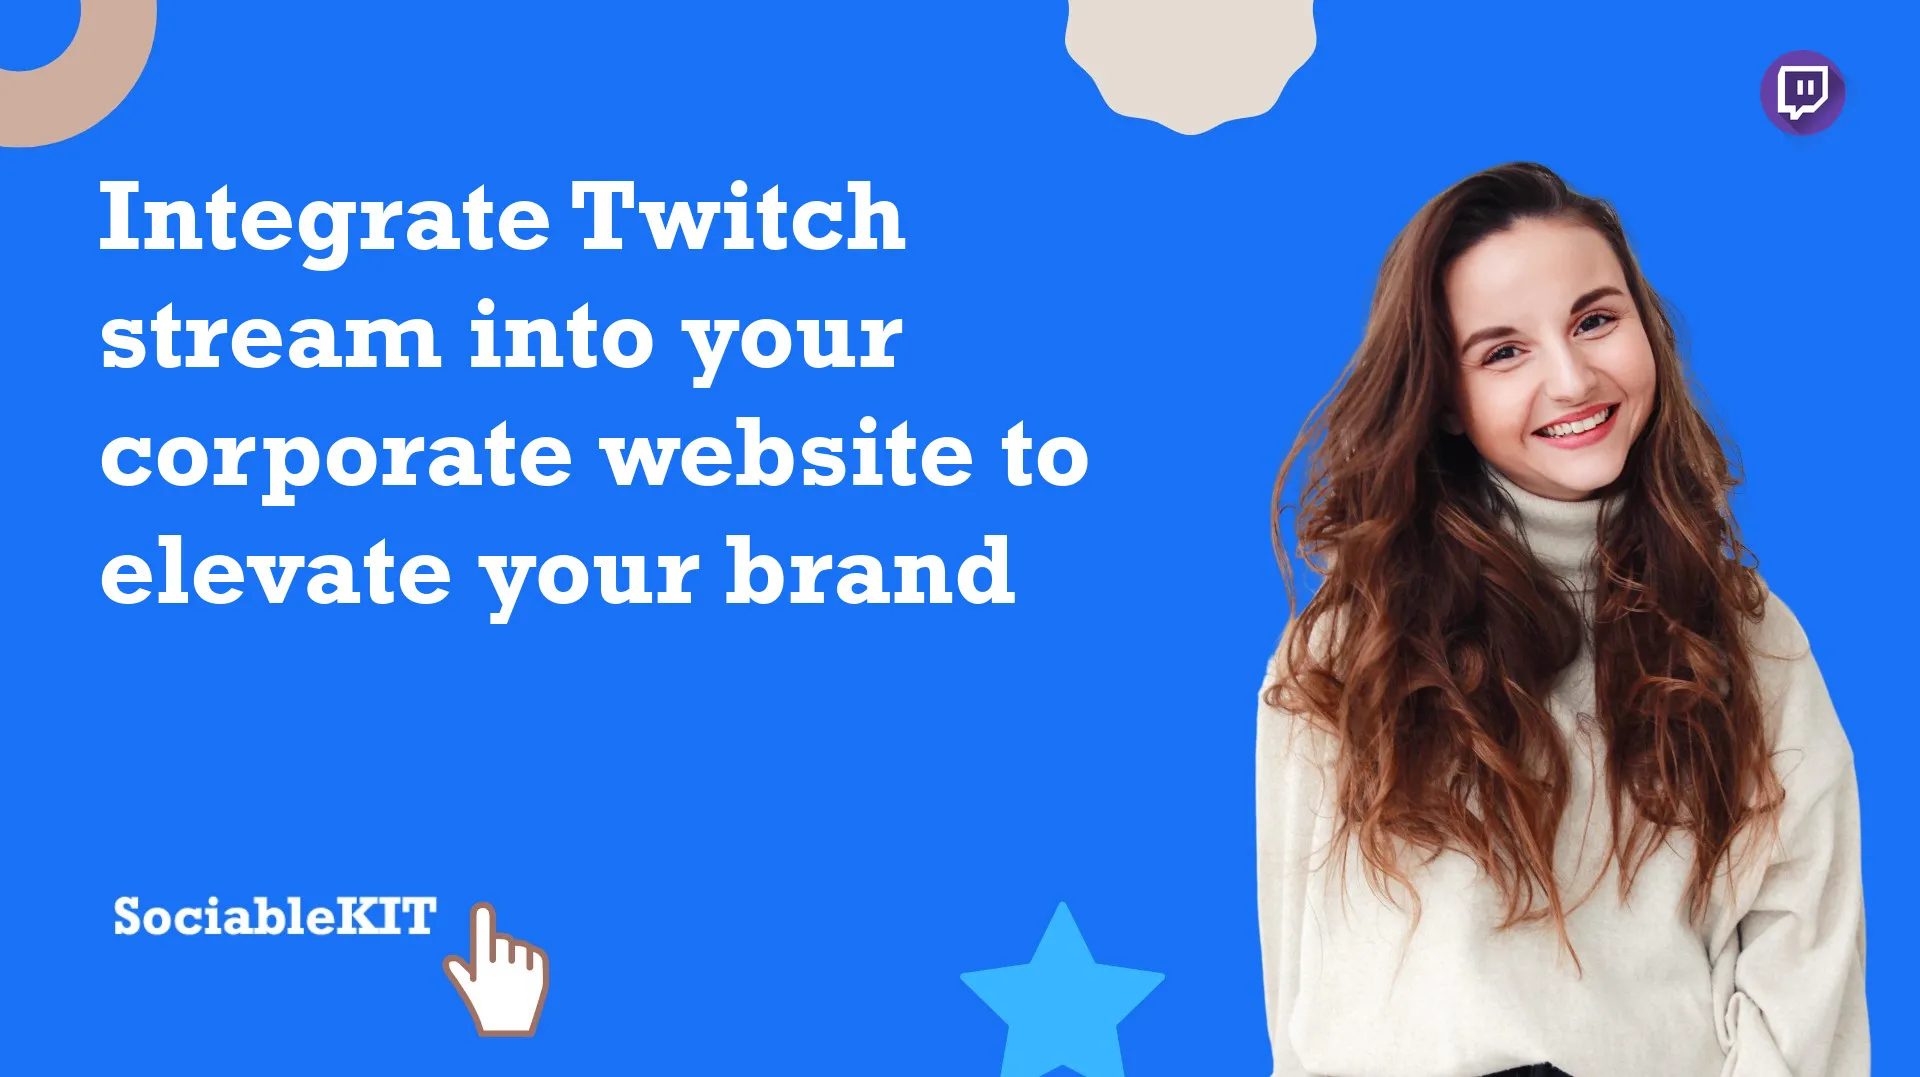 Integrate Twitch stream into your corporate website to elevate your brand